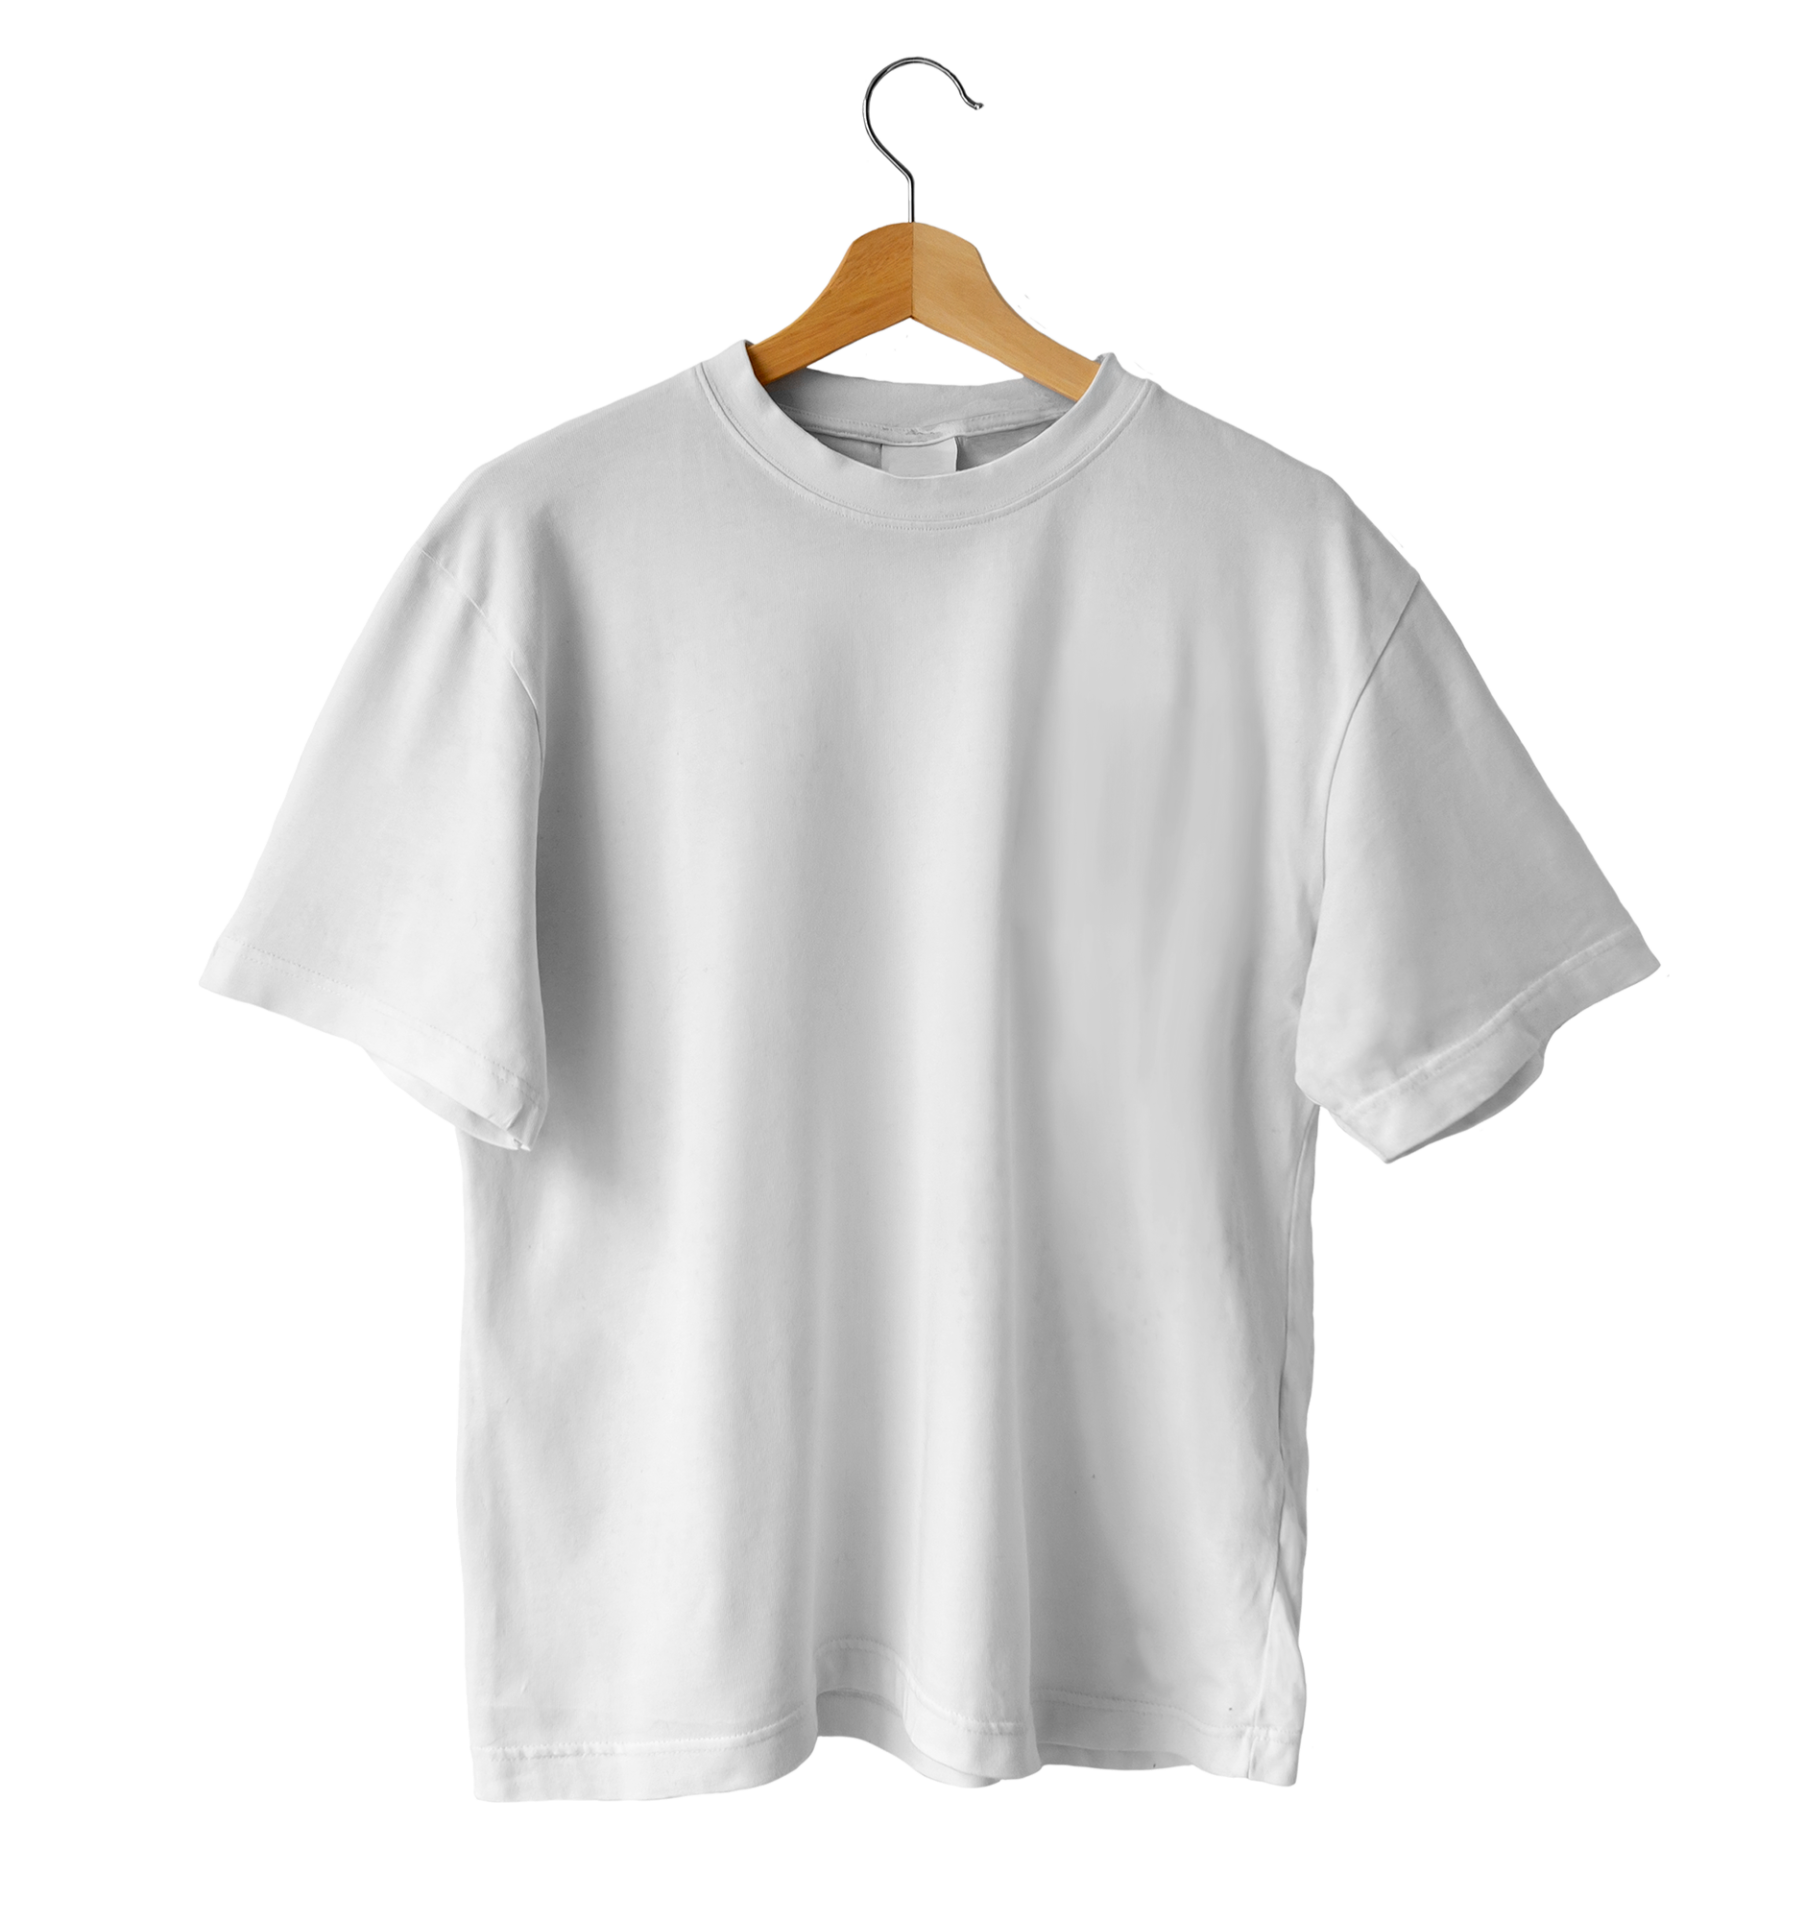 https://ongpng.com/wp-content/uploads/2023/10/white-t-shirt-with-hanger-1.png